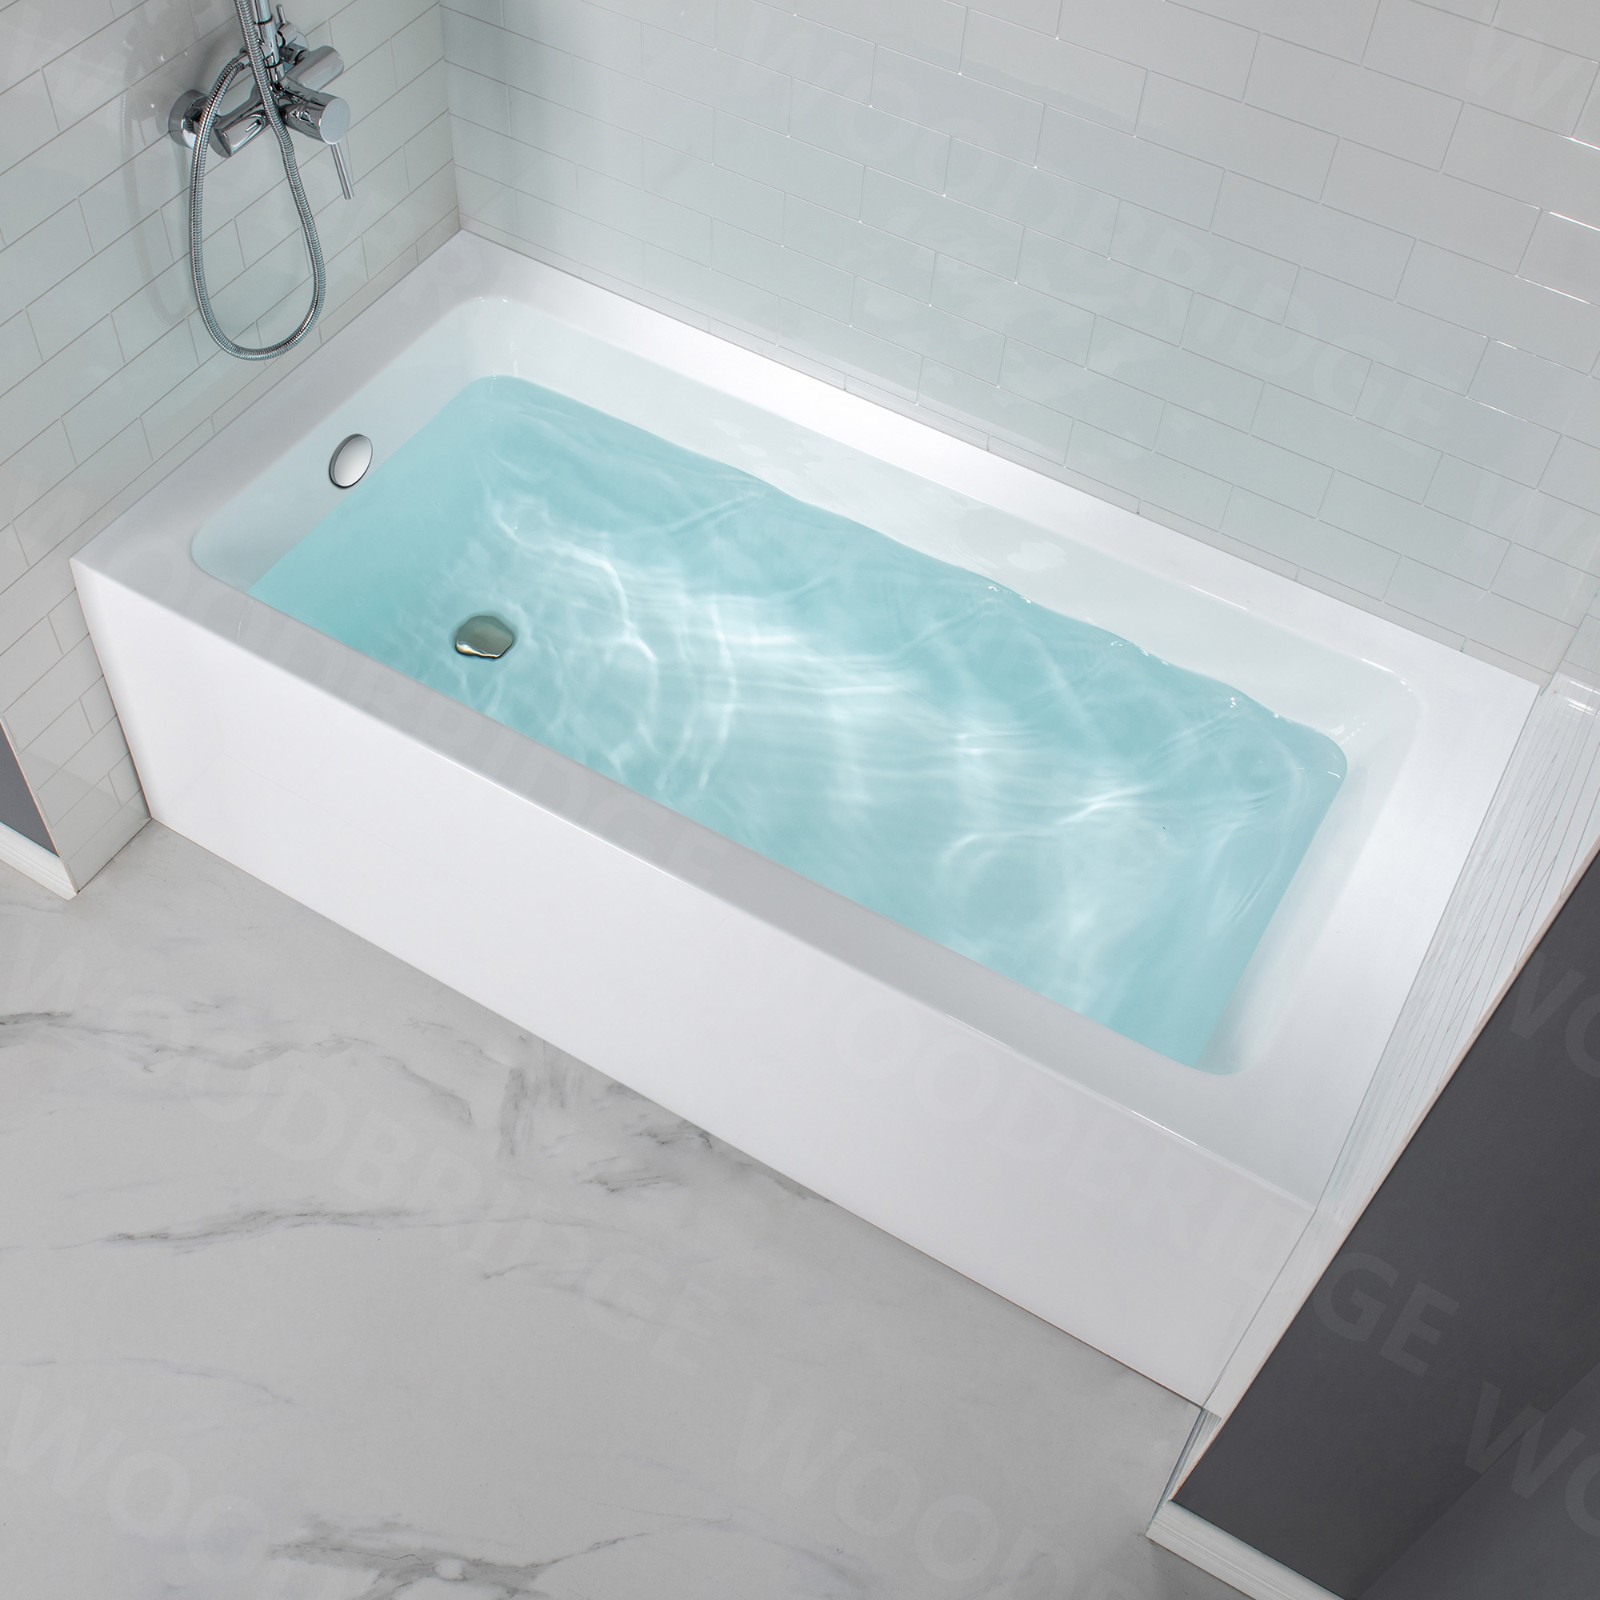  WOODBRIDGE 60-Inch Contemporary Alcove Acrylic Bathtub with Left Hand Drain and Overflow Holes, White_9219